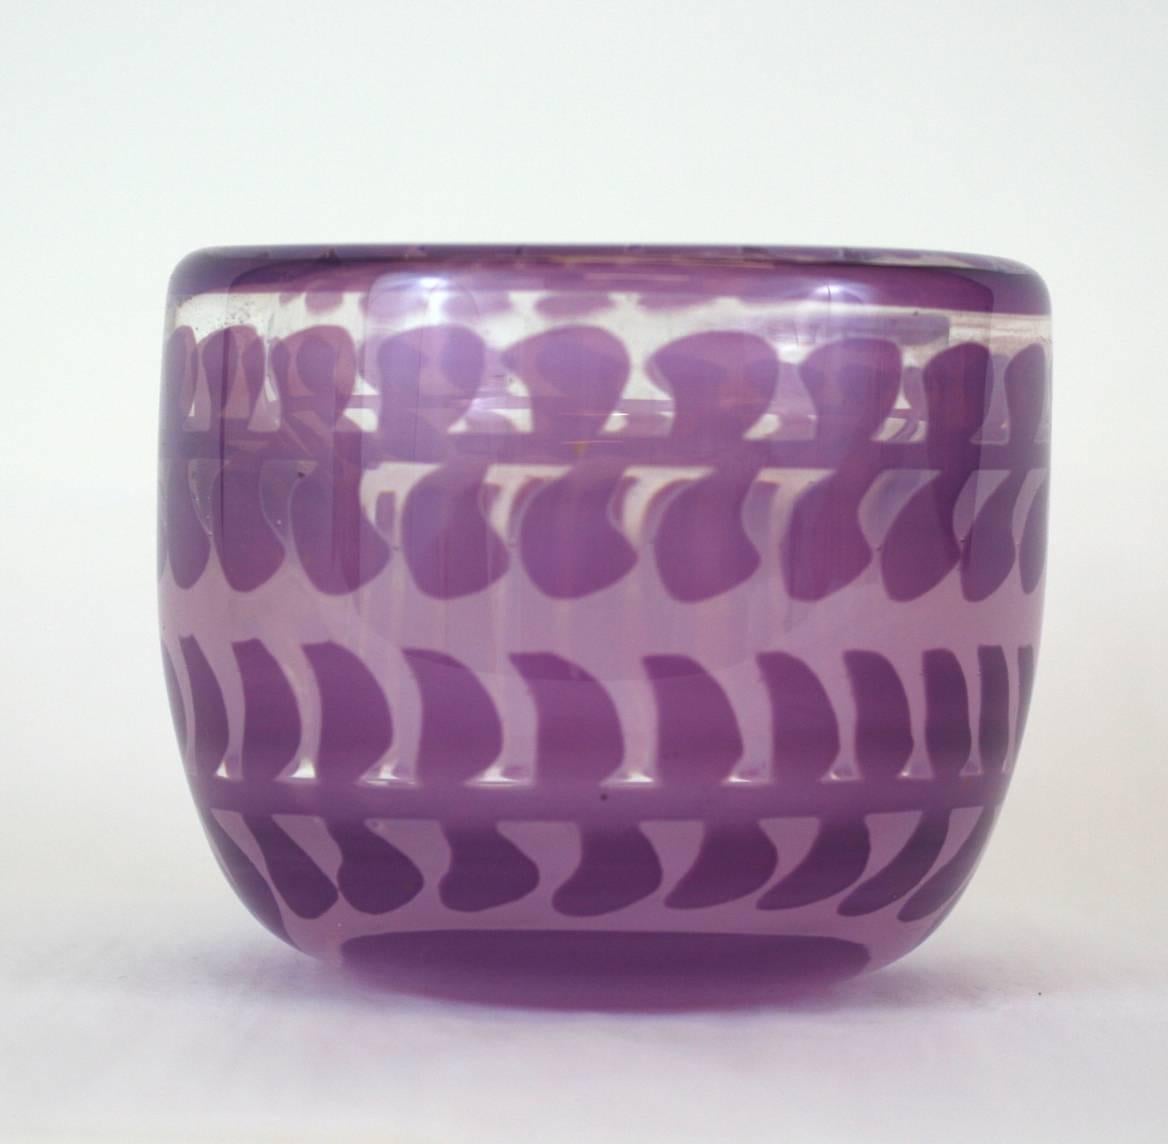 Beautiful, heavy Ariel glass vase with abstract designs in unusual tones of lilac and purple, Design by Ingeborg Lundin, Orrefors, Sweden 1965.
Maker/Stamp, Orrefors, Ariel, nr 613 O, Ingeborg Lundin
Measures: 5.25